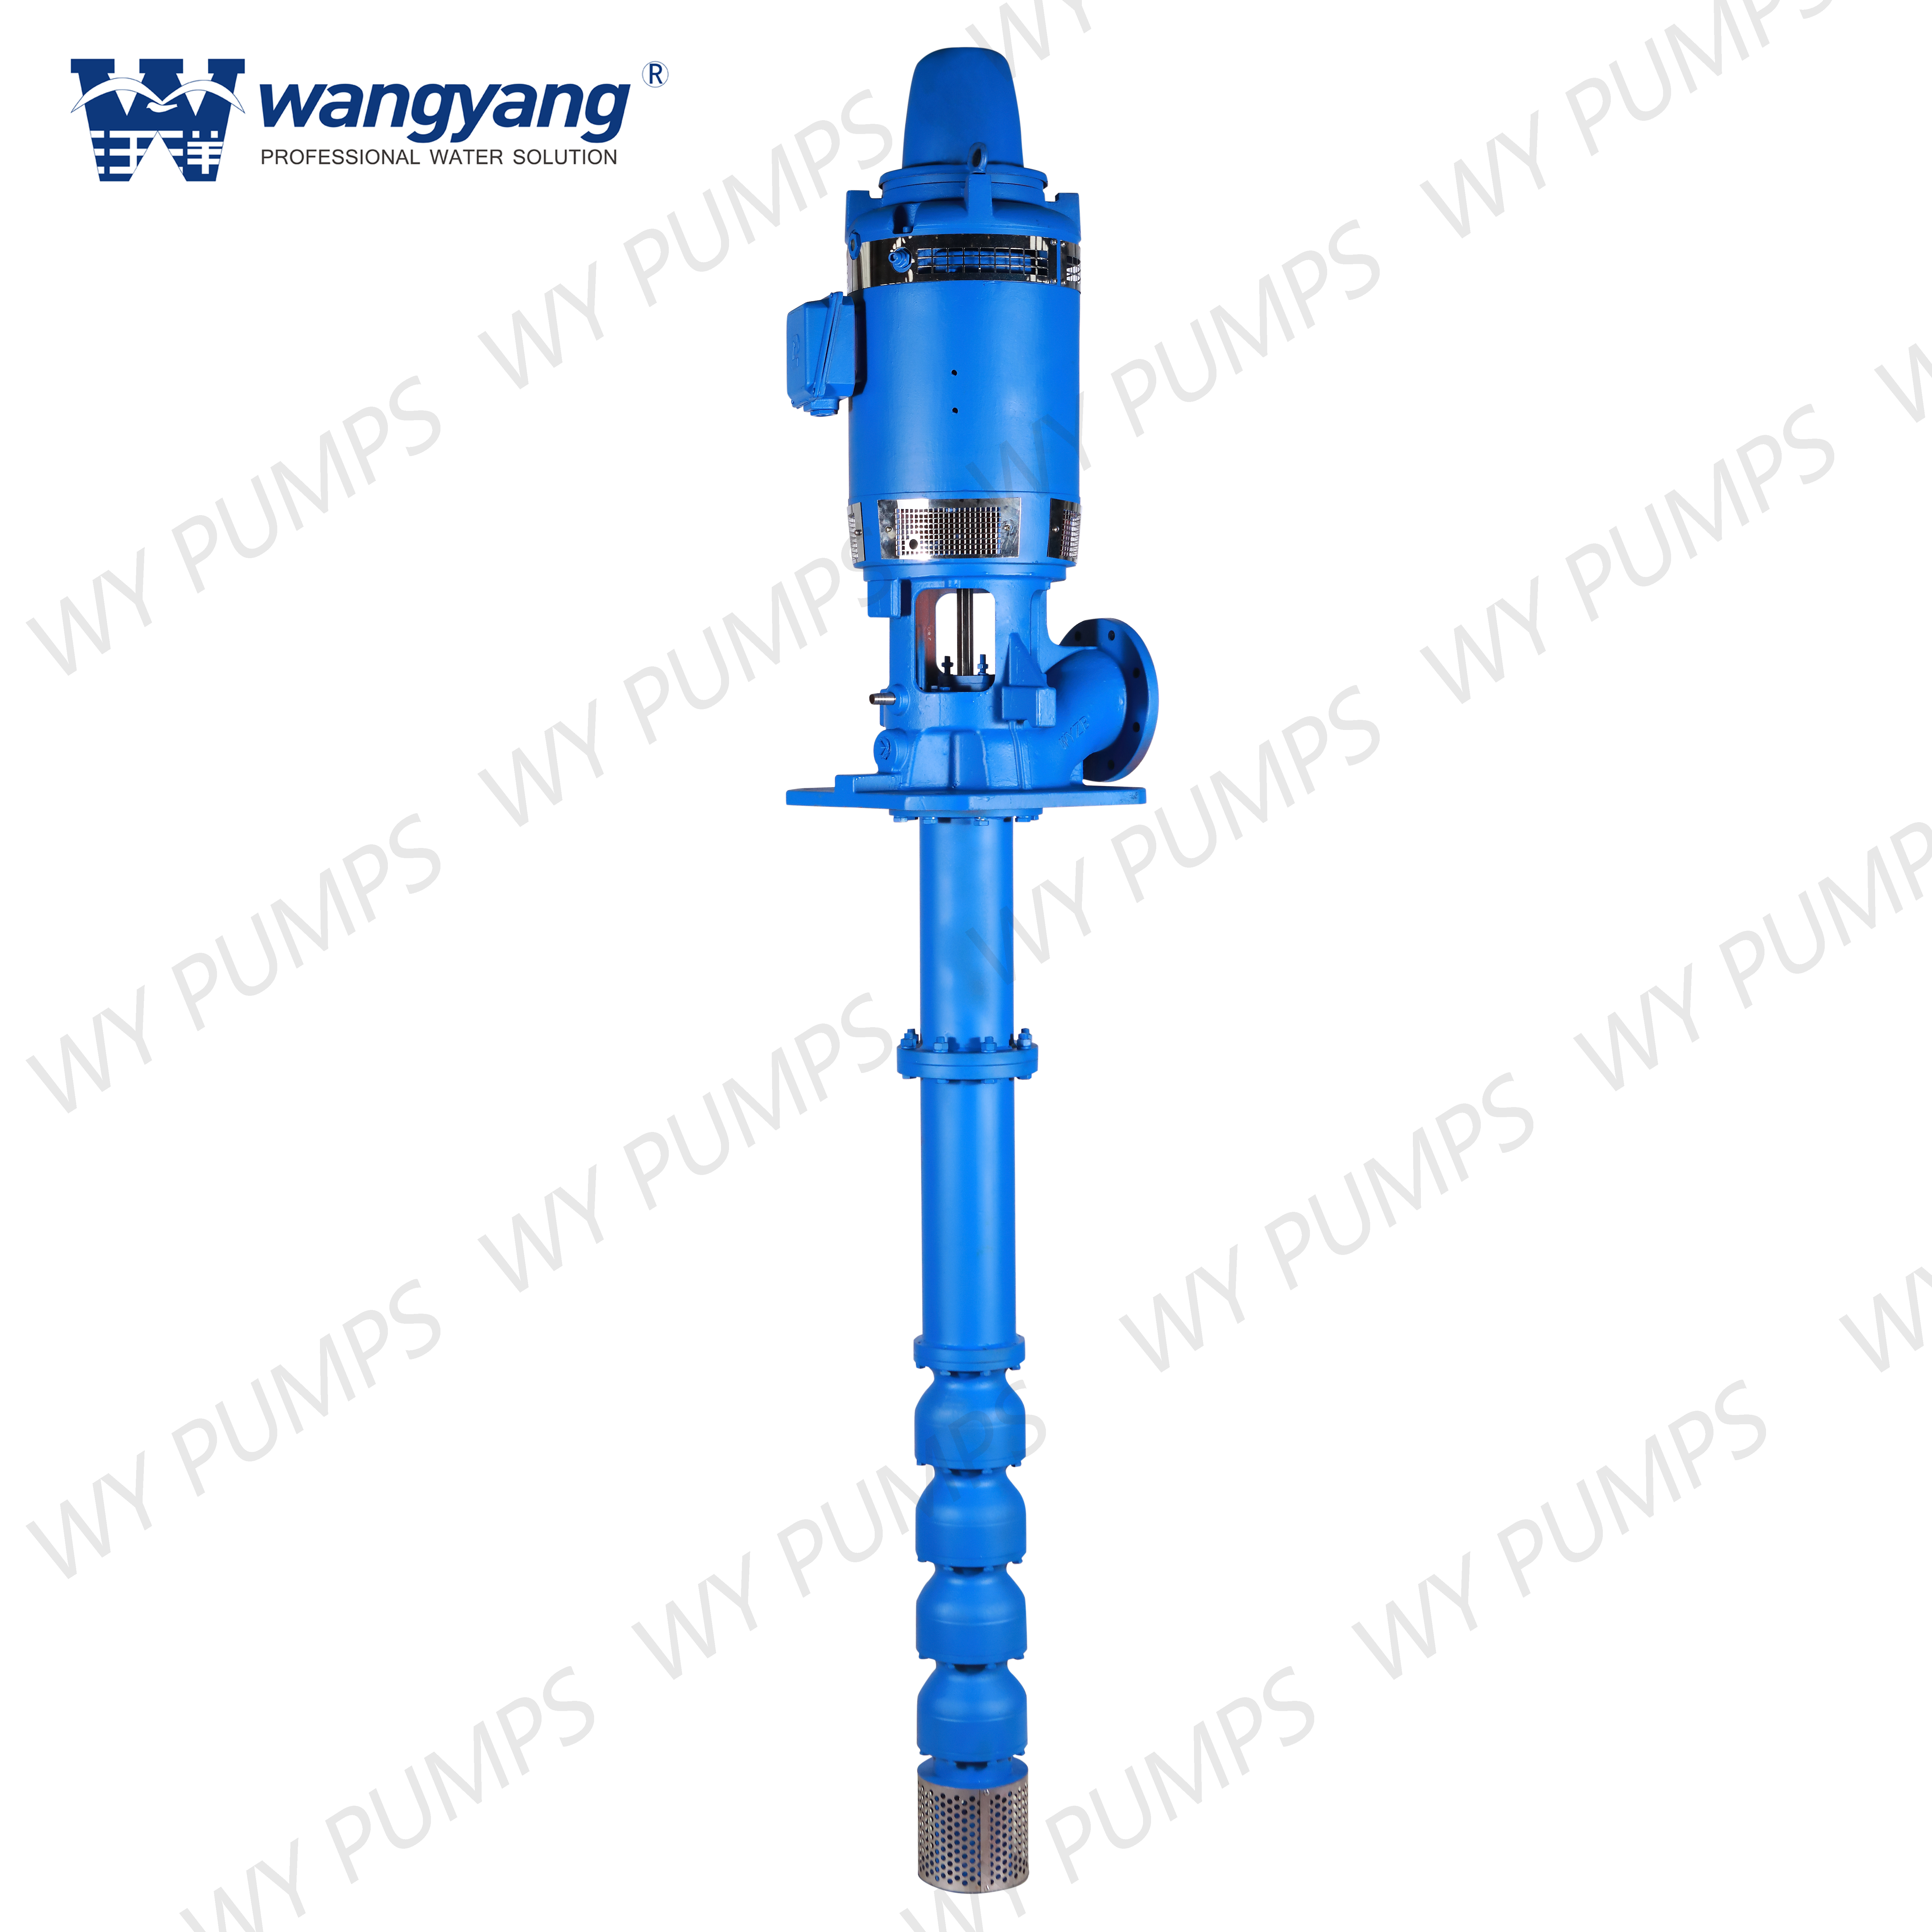 Oil Lubricated Multistage Vertical Turbine Pump With Mechanical Seal